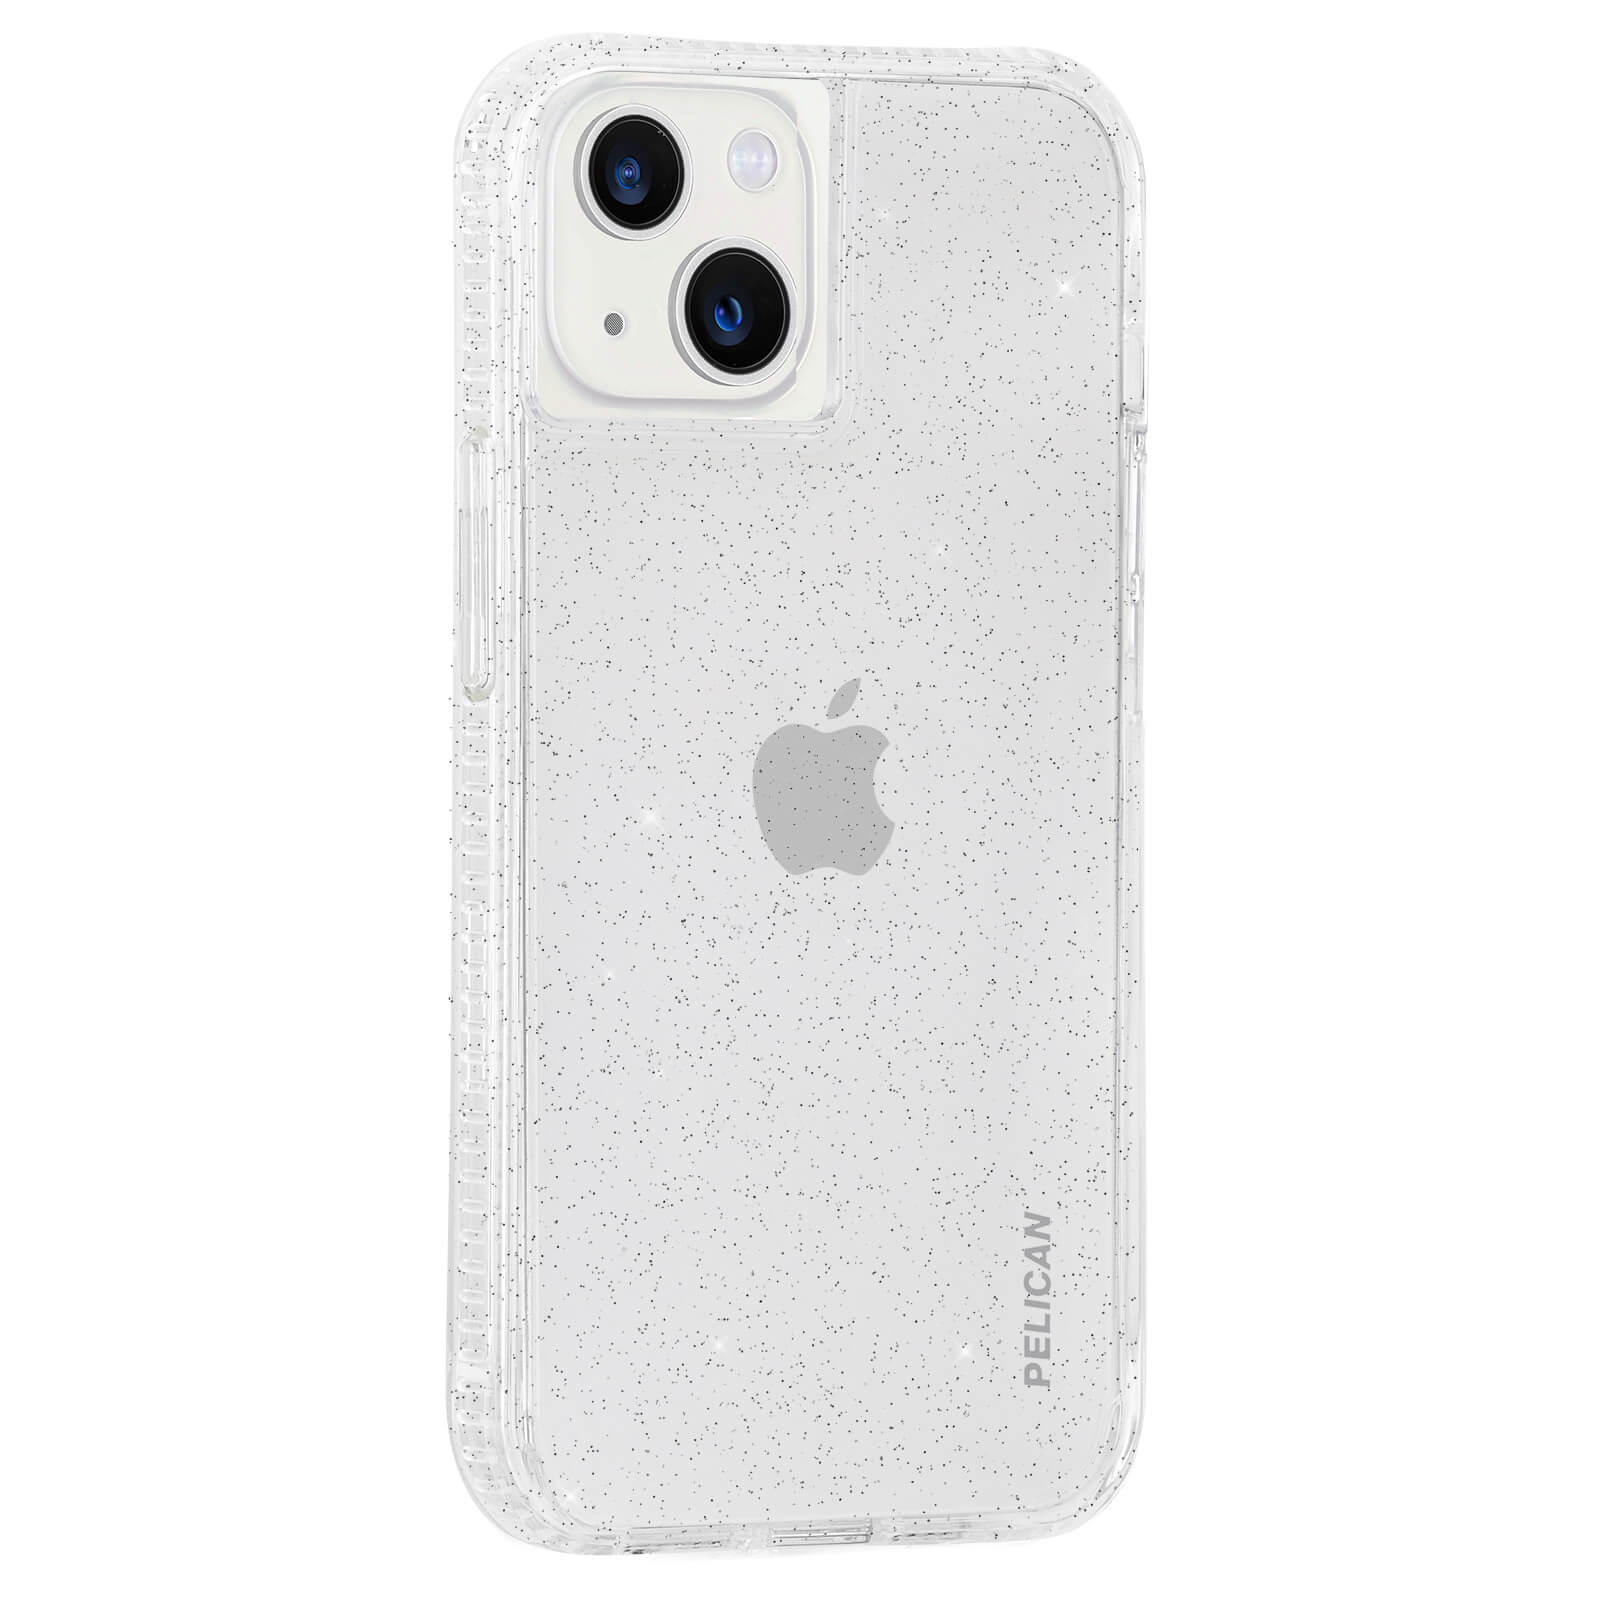 Sparkly Pelican protective case for iPhone 13 mini color::Pelican Sparkle